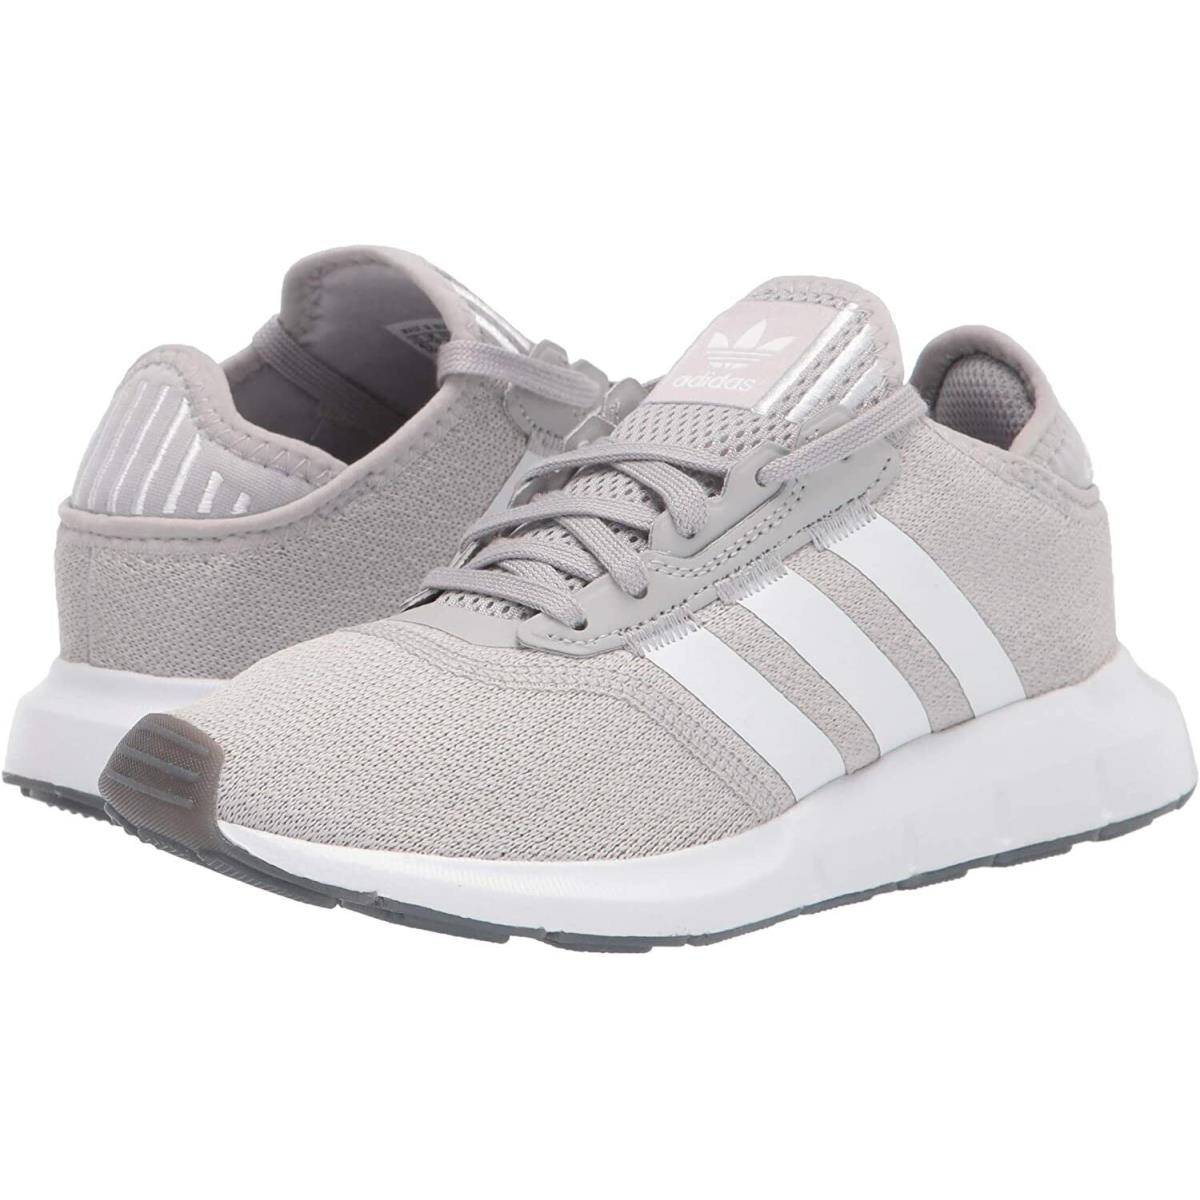 Women`s Shoes Adidas Swift Run X Casual Athletic Sneakers FY2135 Grey White - Gray